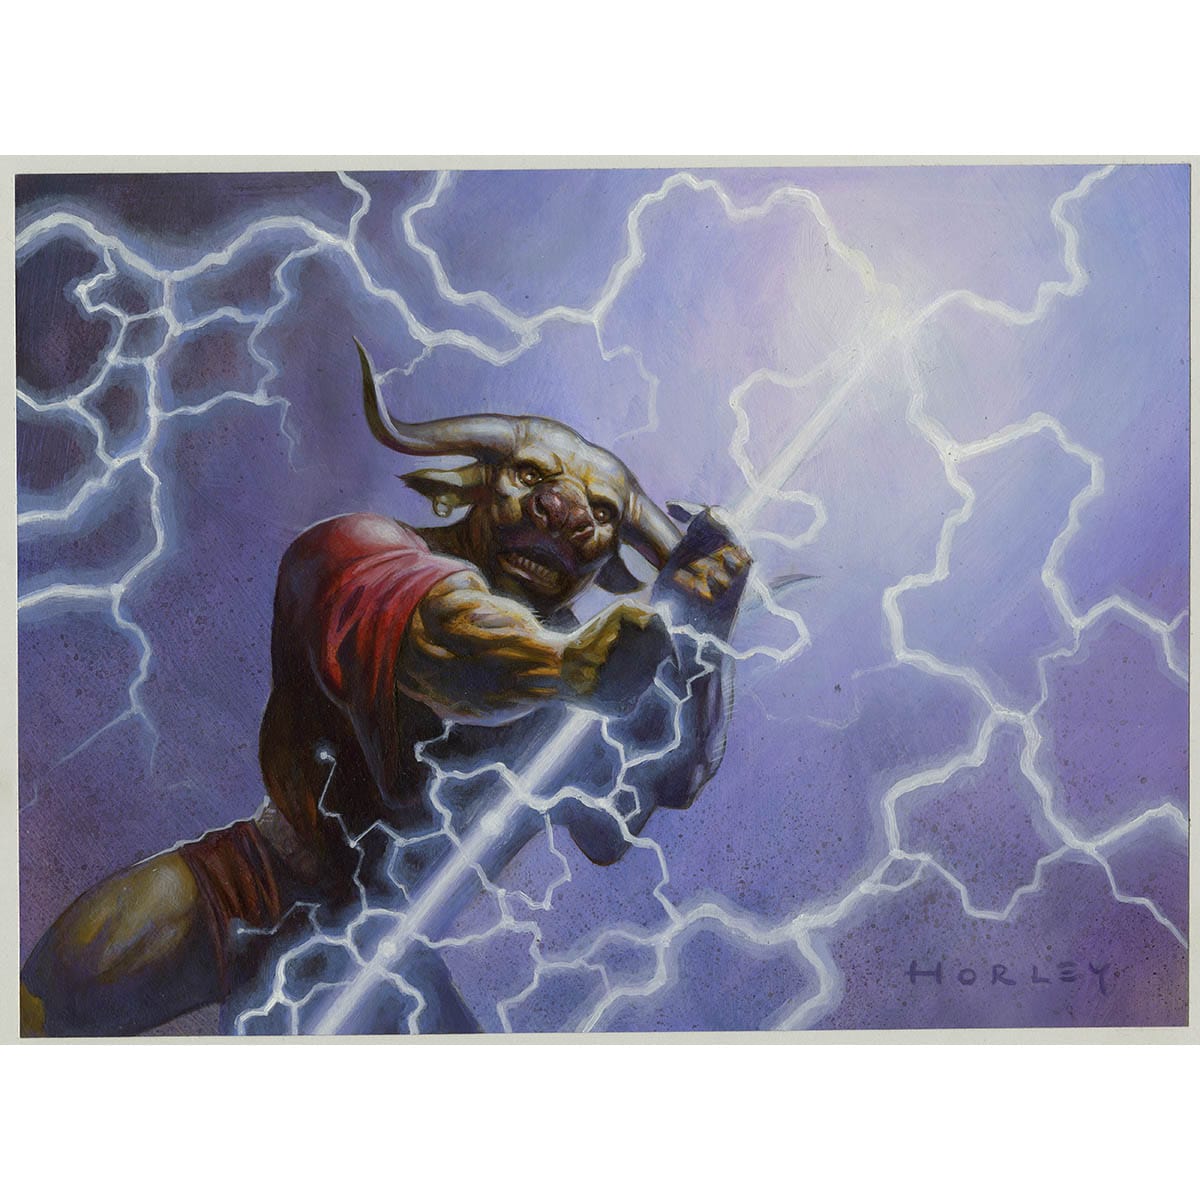 Anaba Shaman Print - Print - Original Magic Art - Accessories for Magic the Gathering and other card games